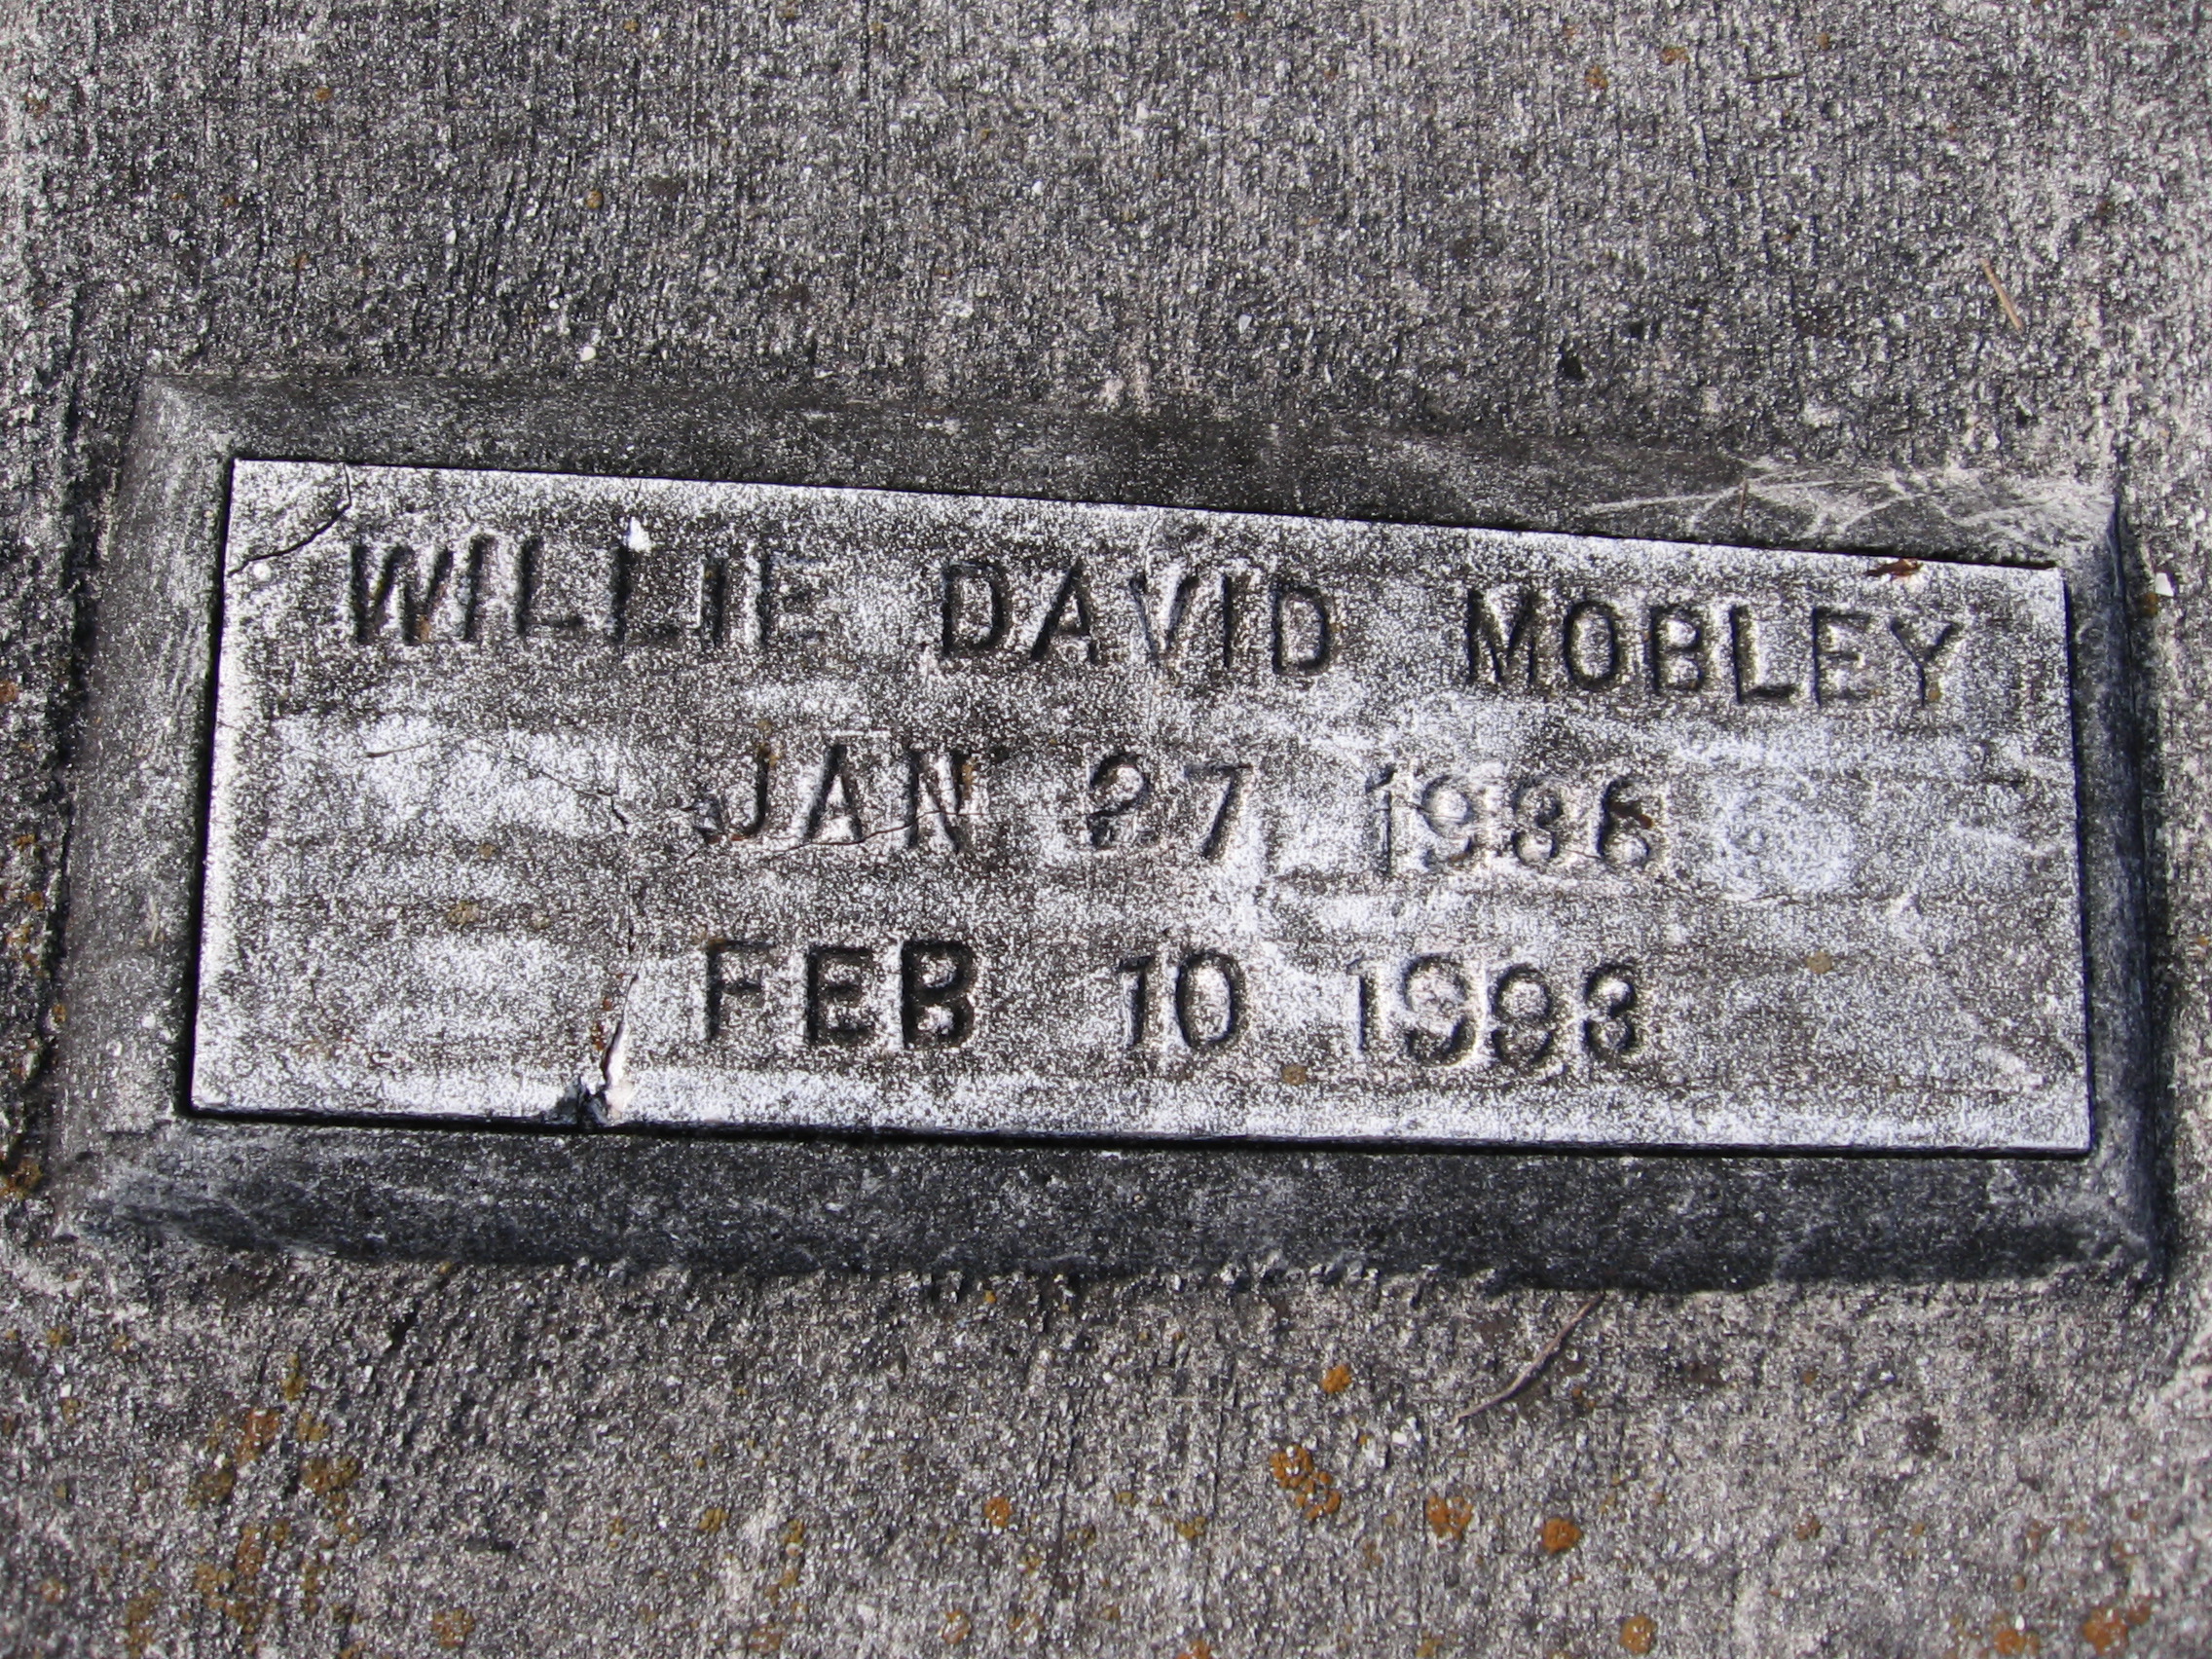 Wille David Mobley